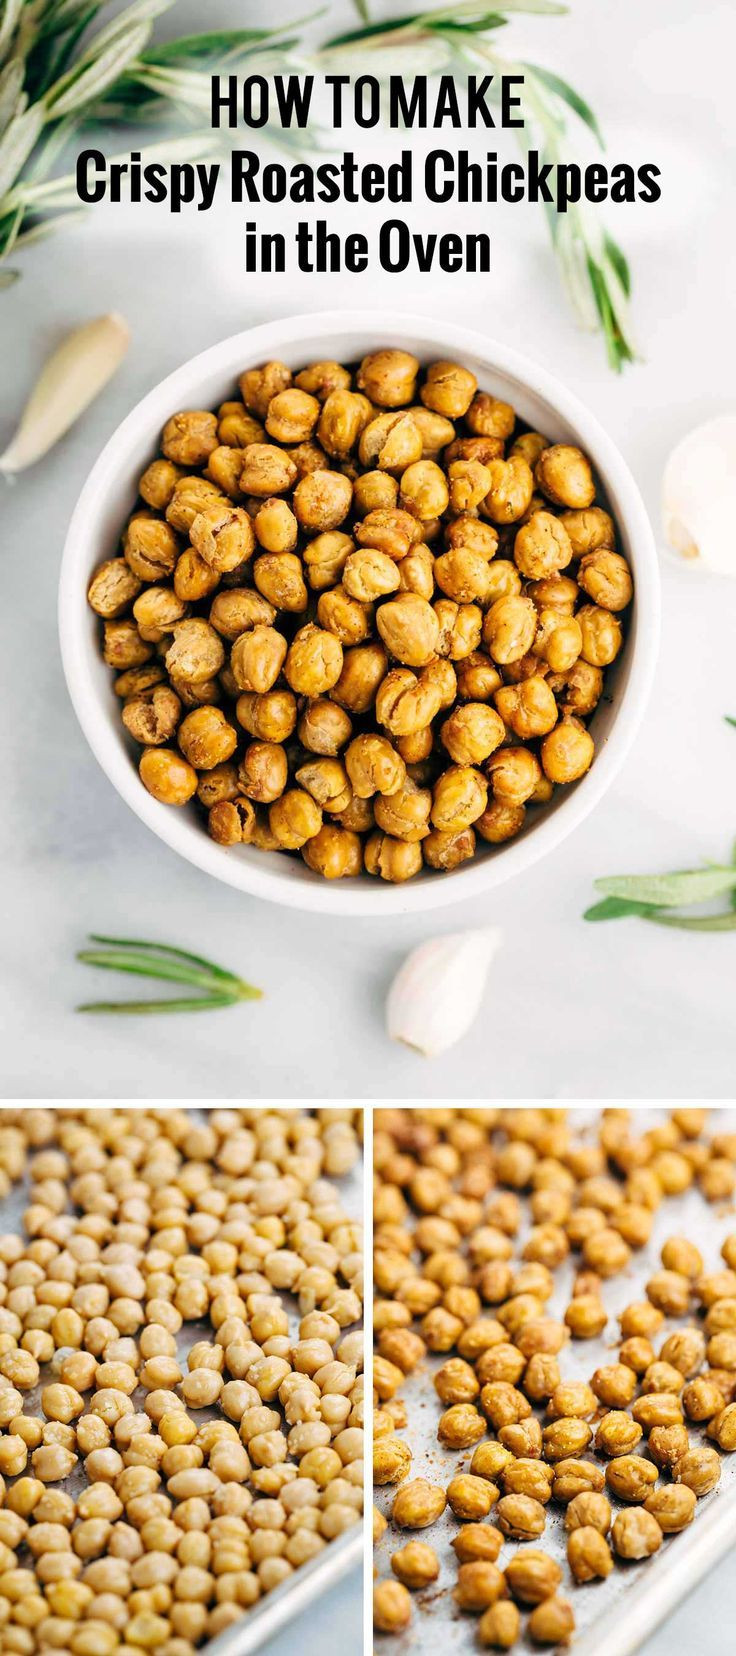 Healthy Crunchy Snacks
 25 best ideas about Oven Roasted Chickpeas on Pinterest